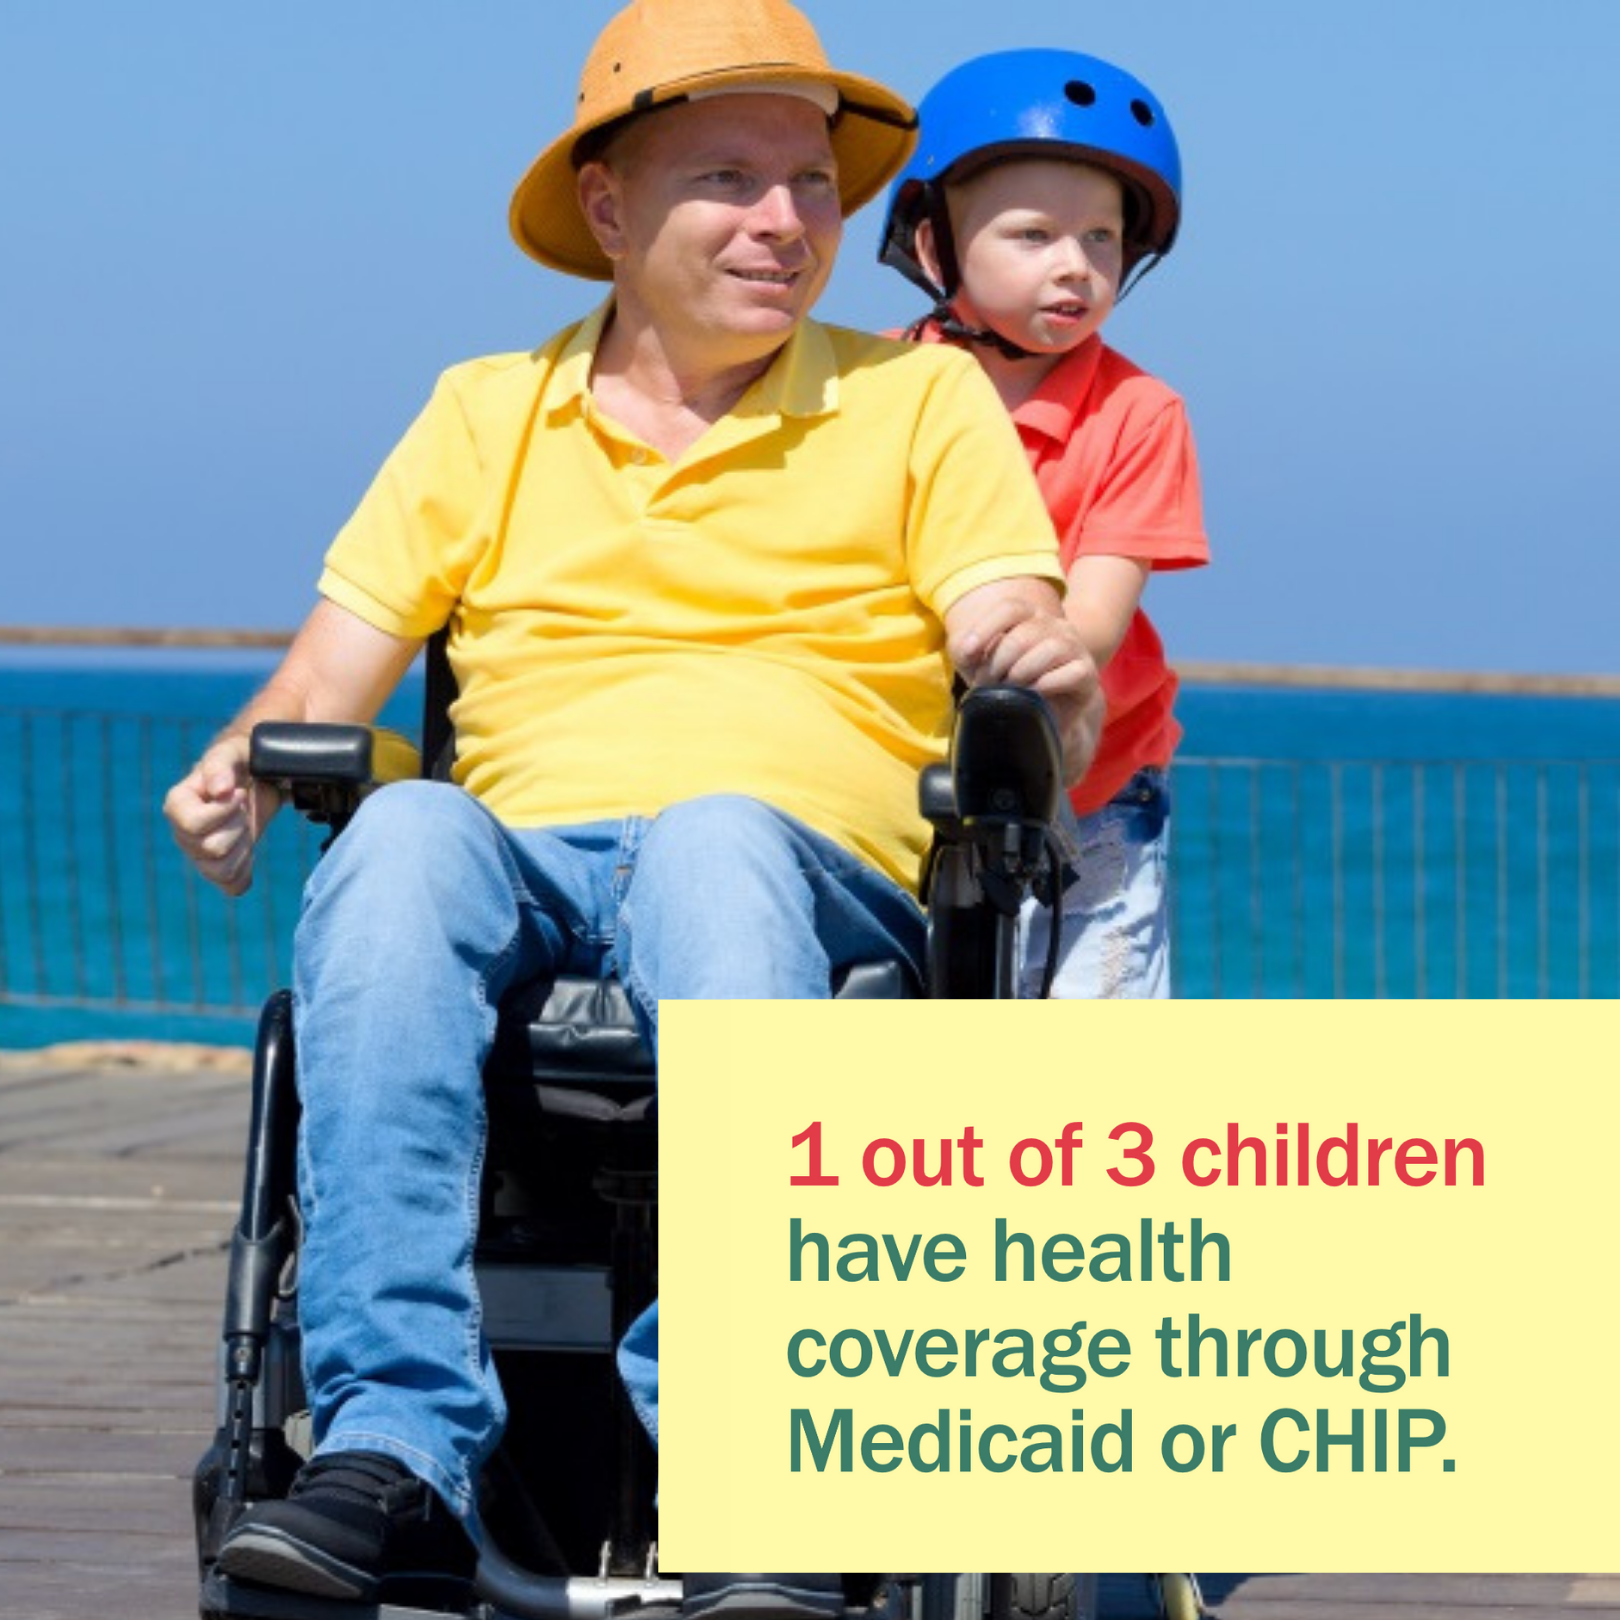 A man using a power wheelchair on a boardwalk, with son roller skating behind with message "1 out of 3 children have health insurance coverage through Medicaid or CHIP."